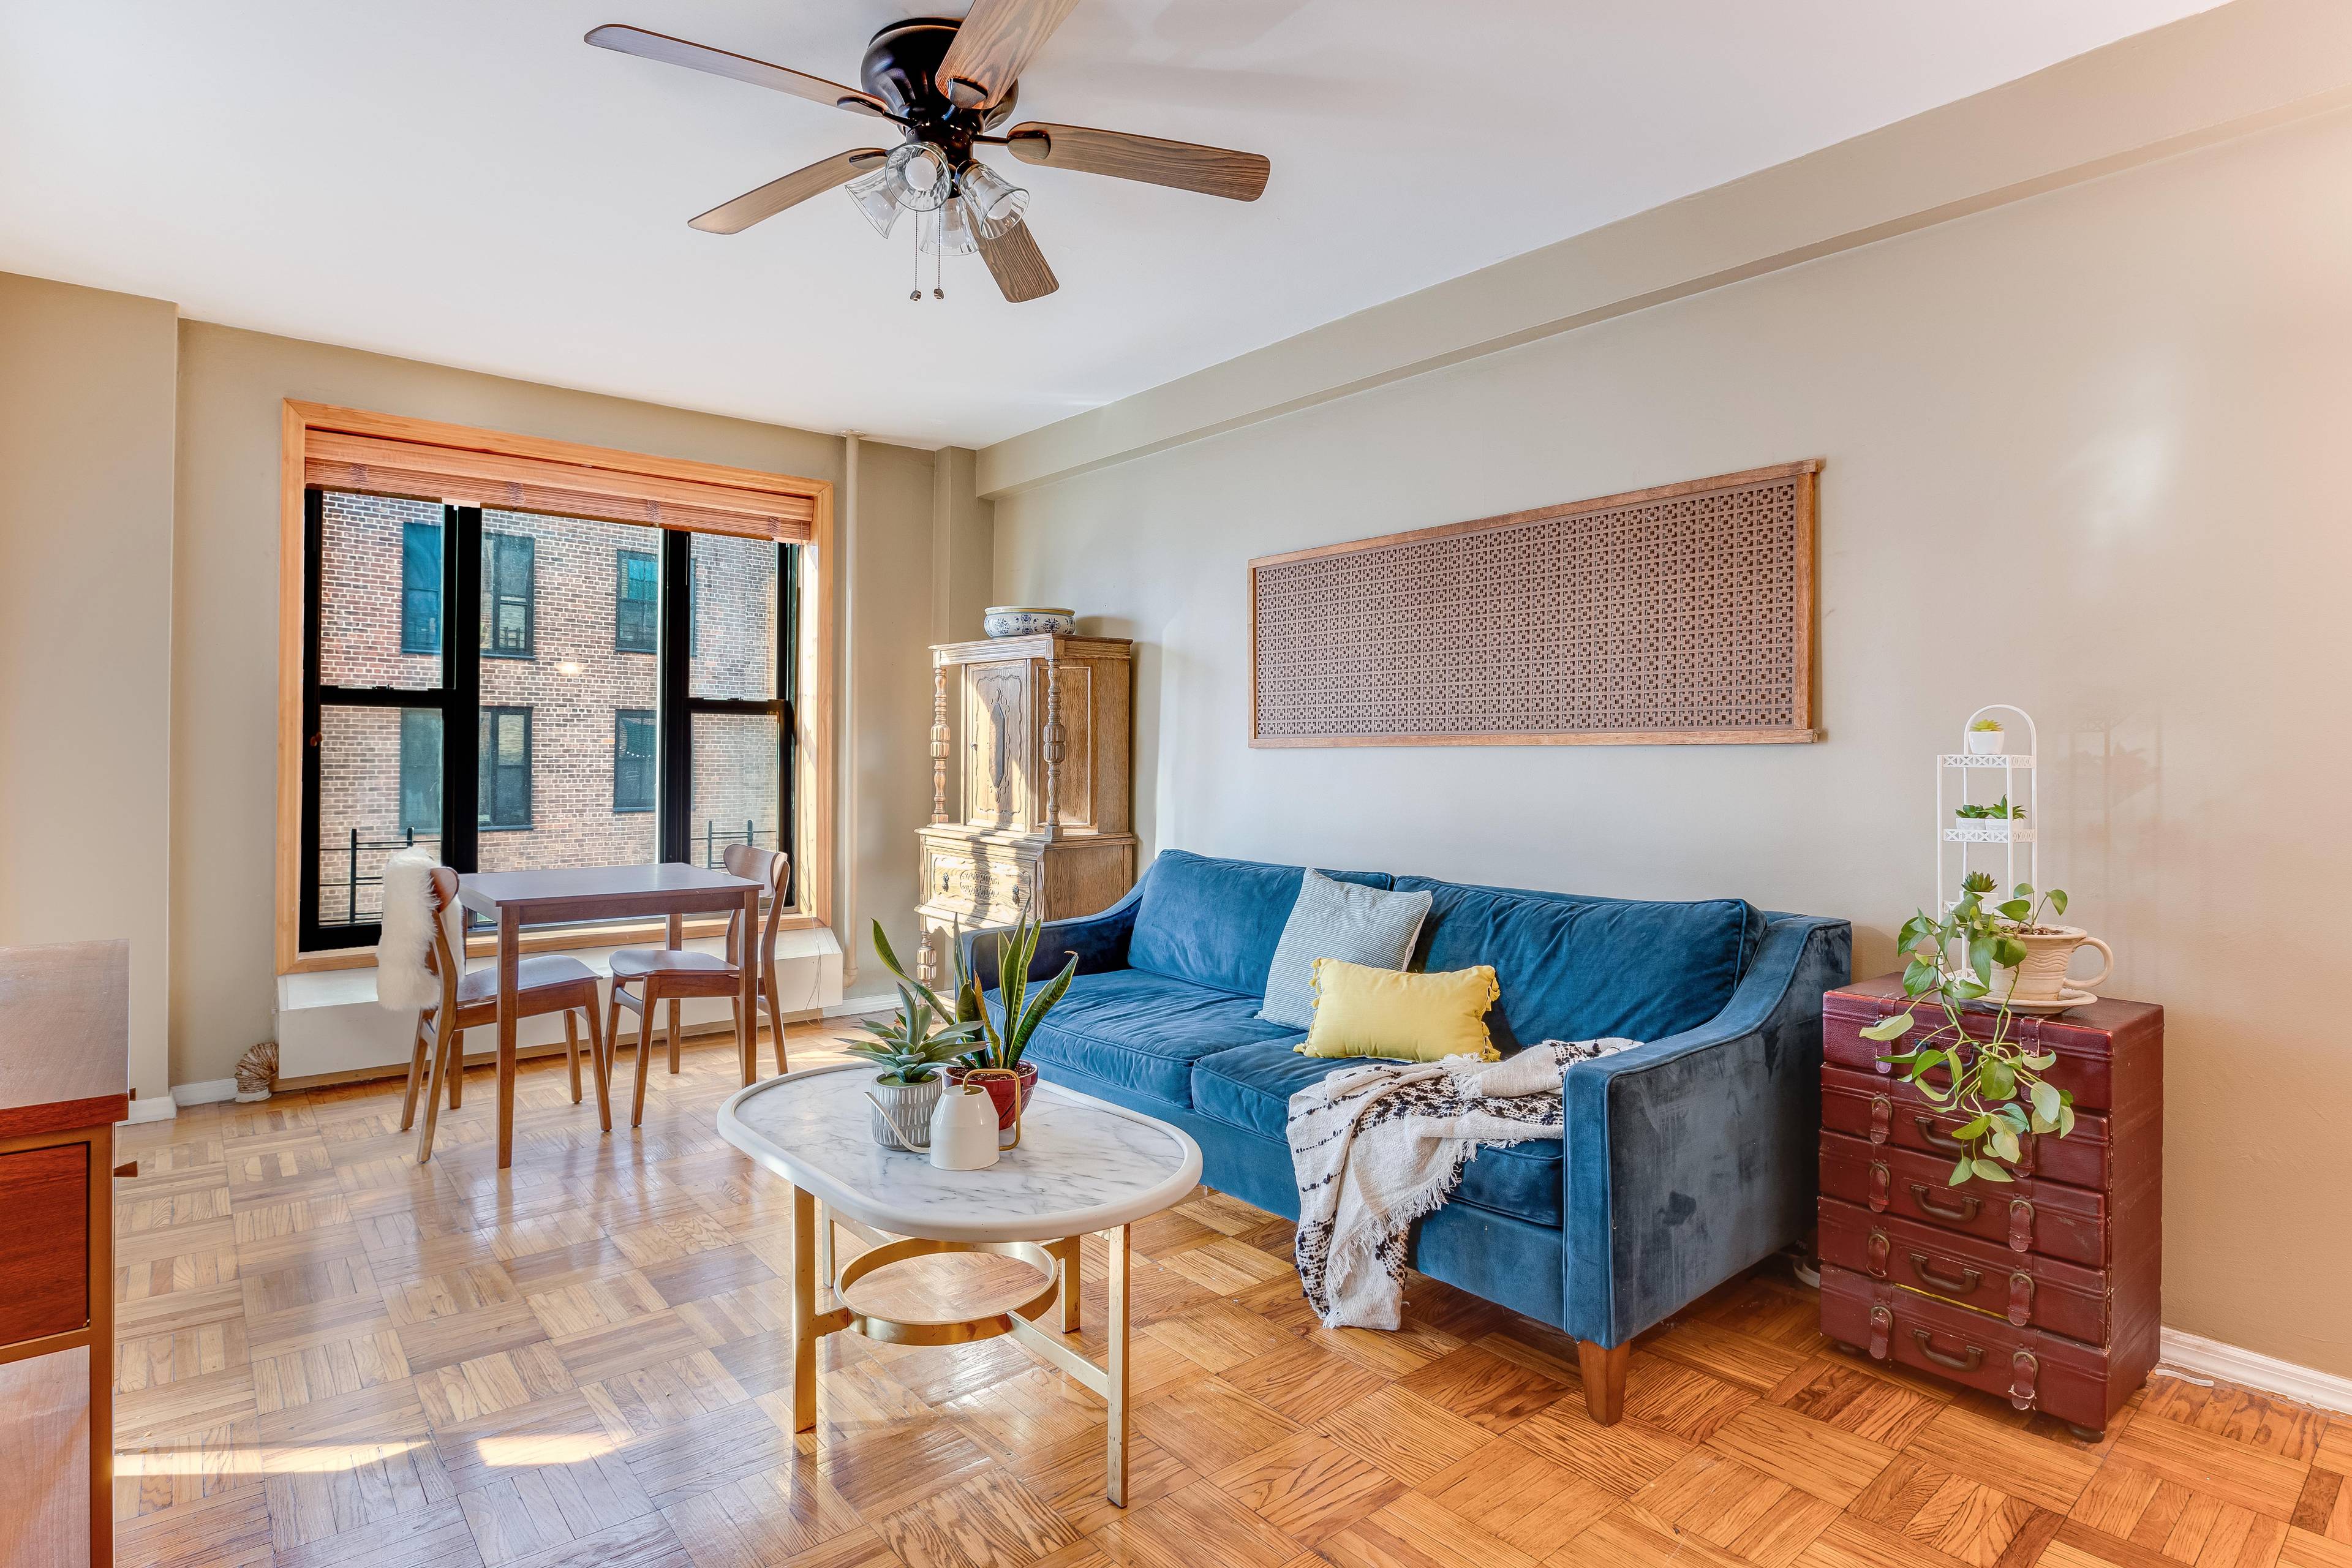 This bright and sunny courtyard facing apartment is located on the 10th floor in vibrant Clinton Hill, Brooklyn.